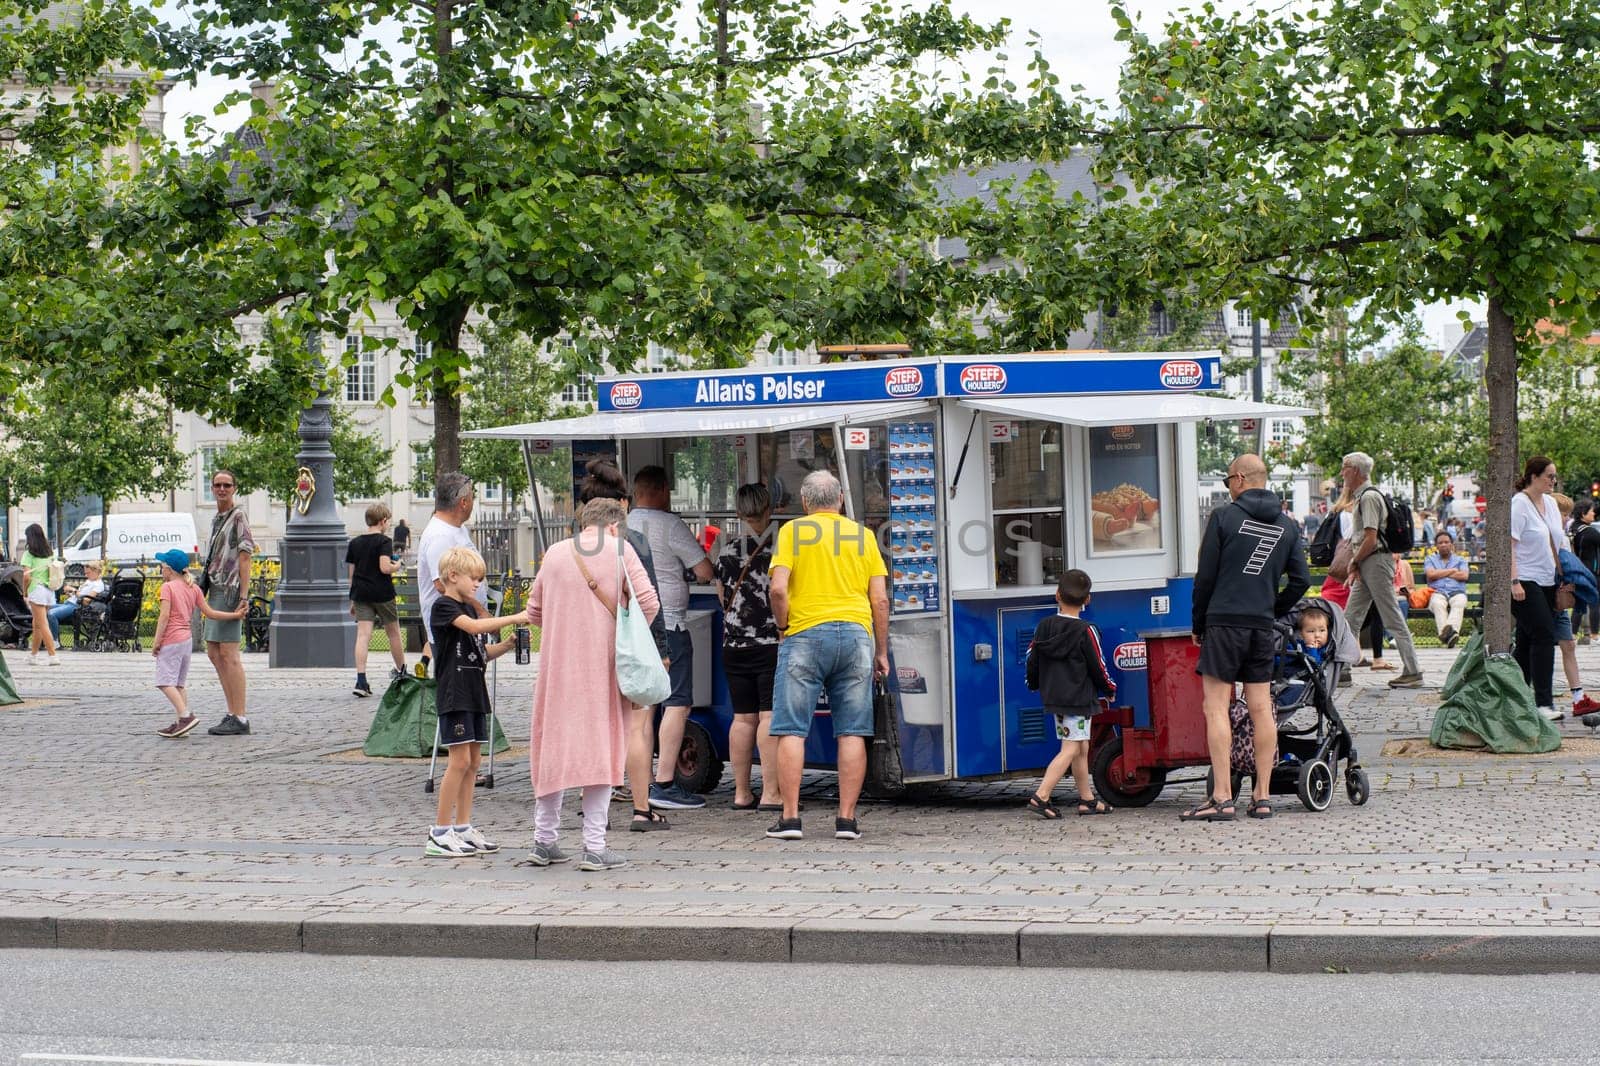 Copenhagen, Denmark - July 11, 2022: Customers at a traditional hot dog cart in the city center.